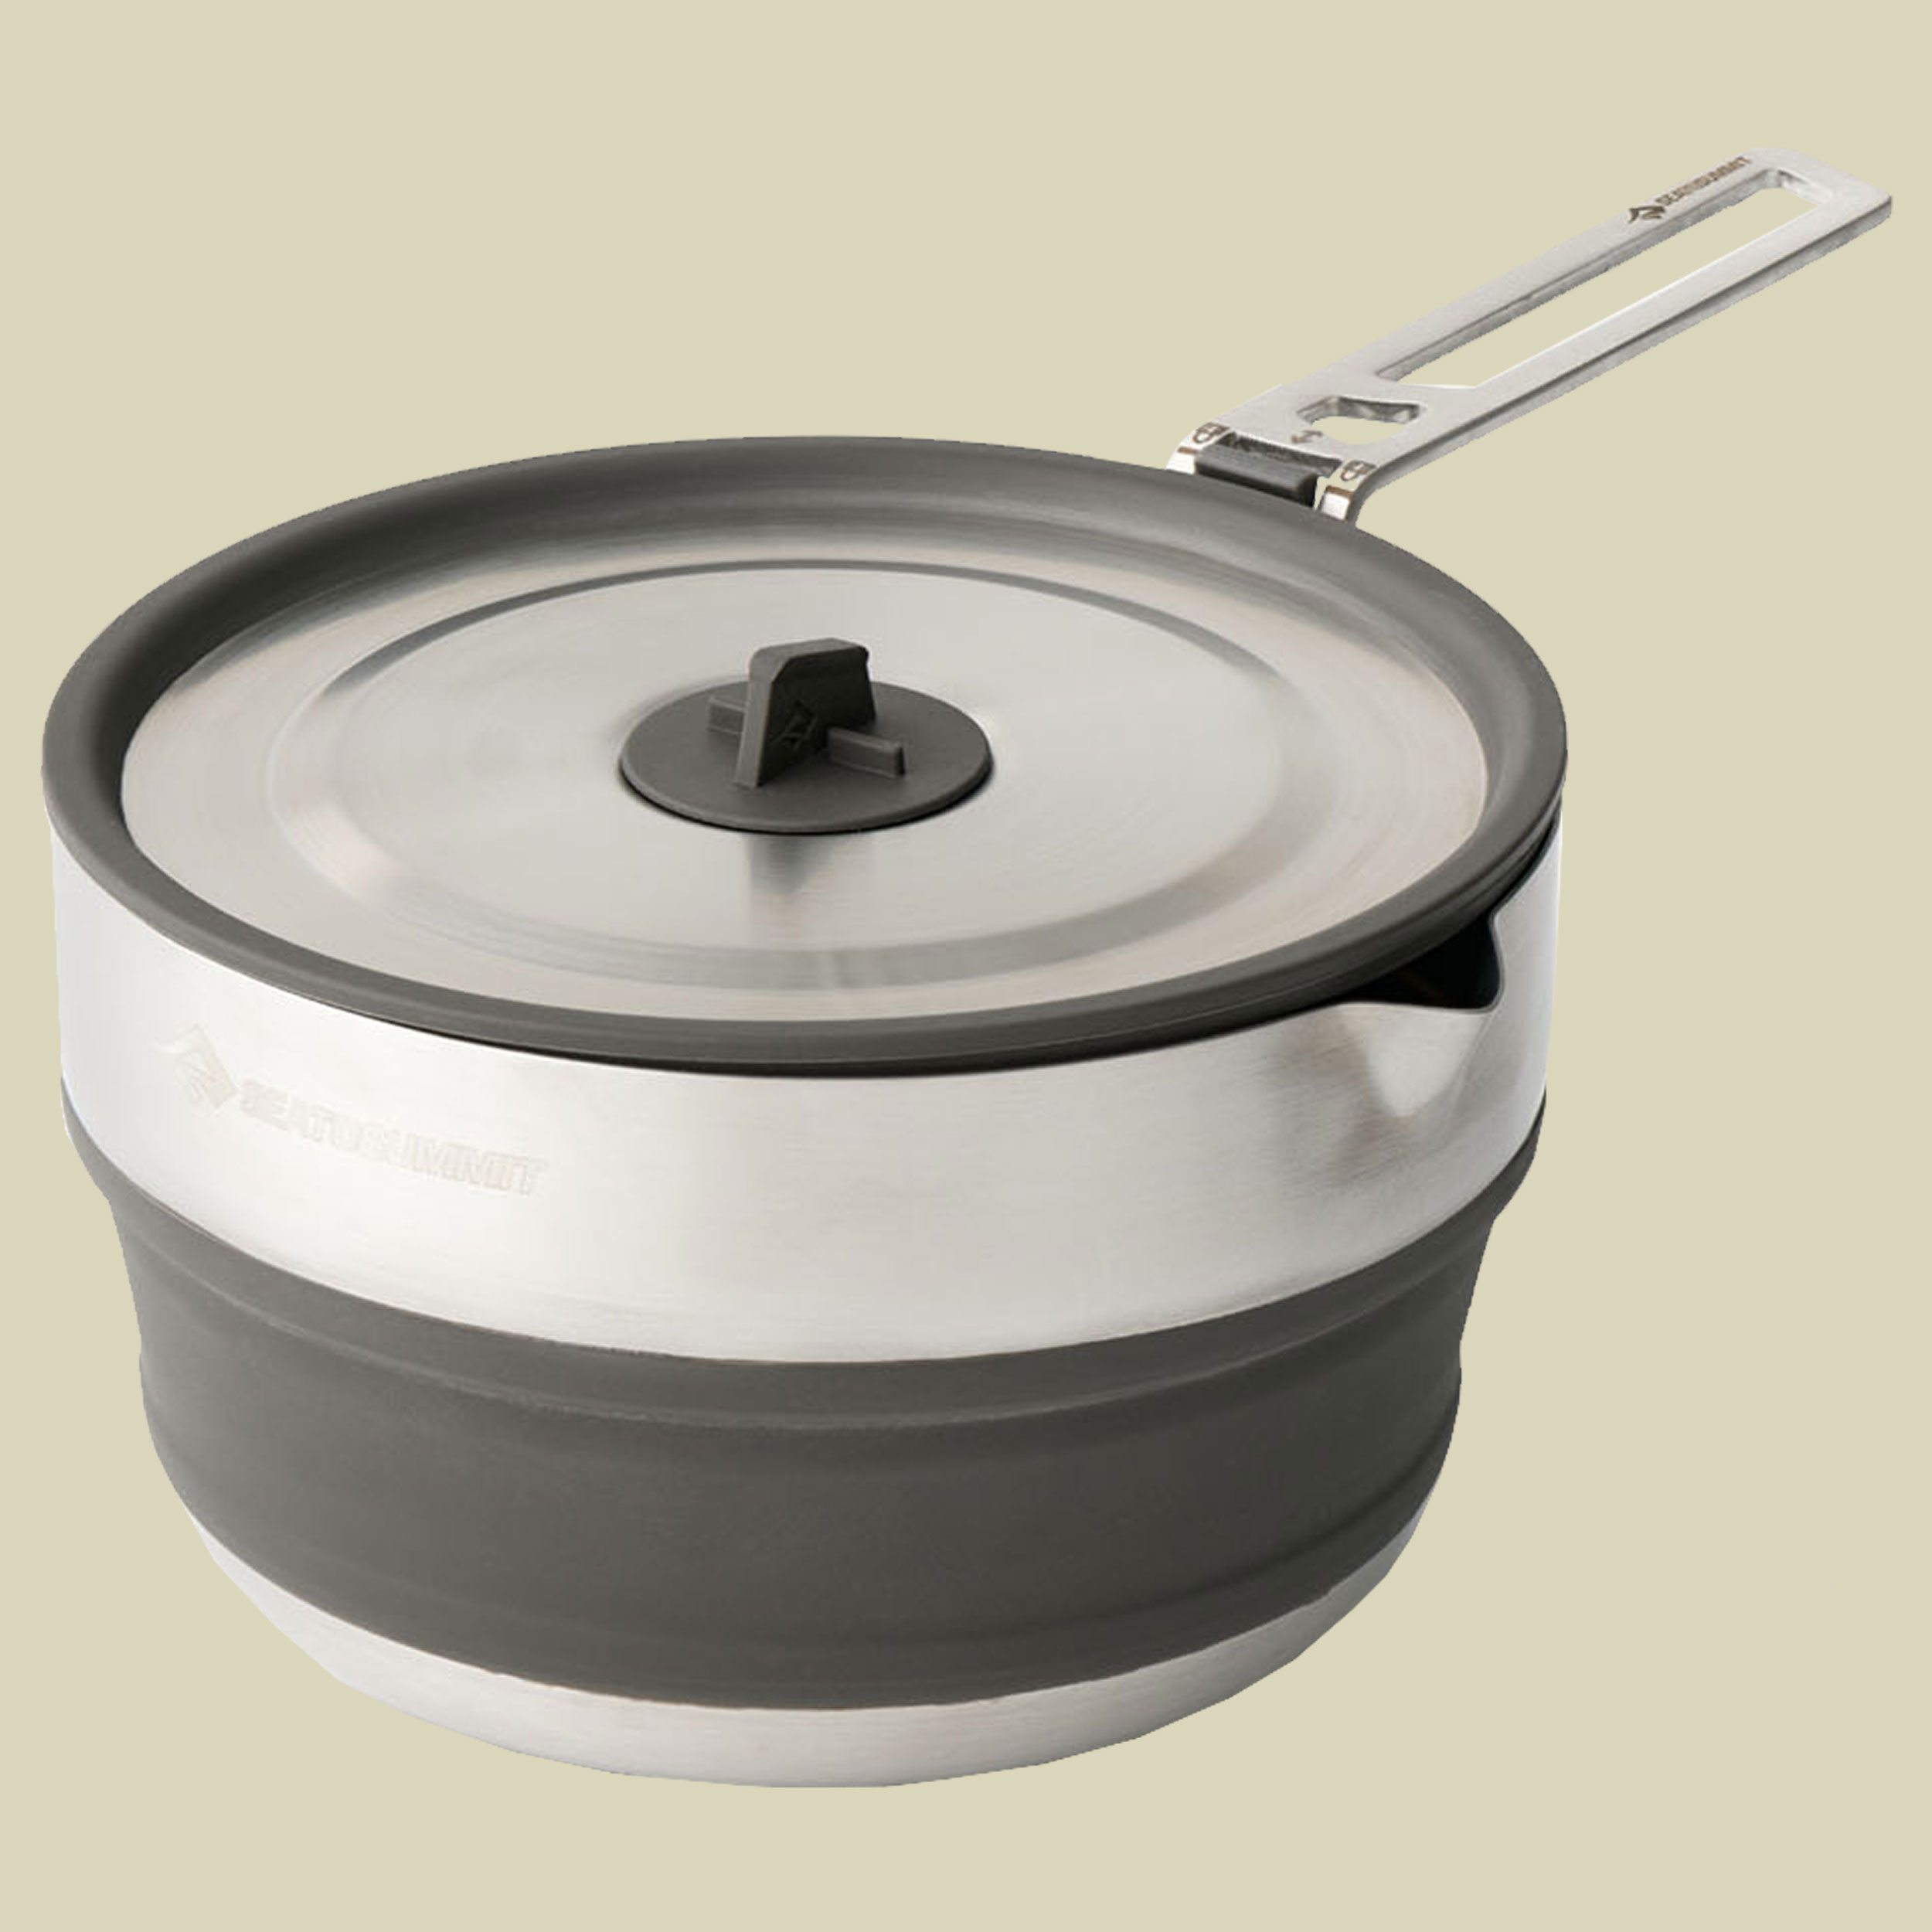 Detour Stainless Steel Collapsible Pouring Pot